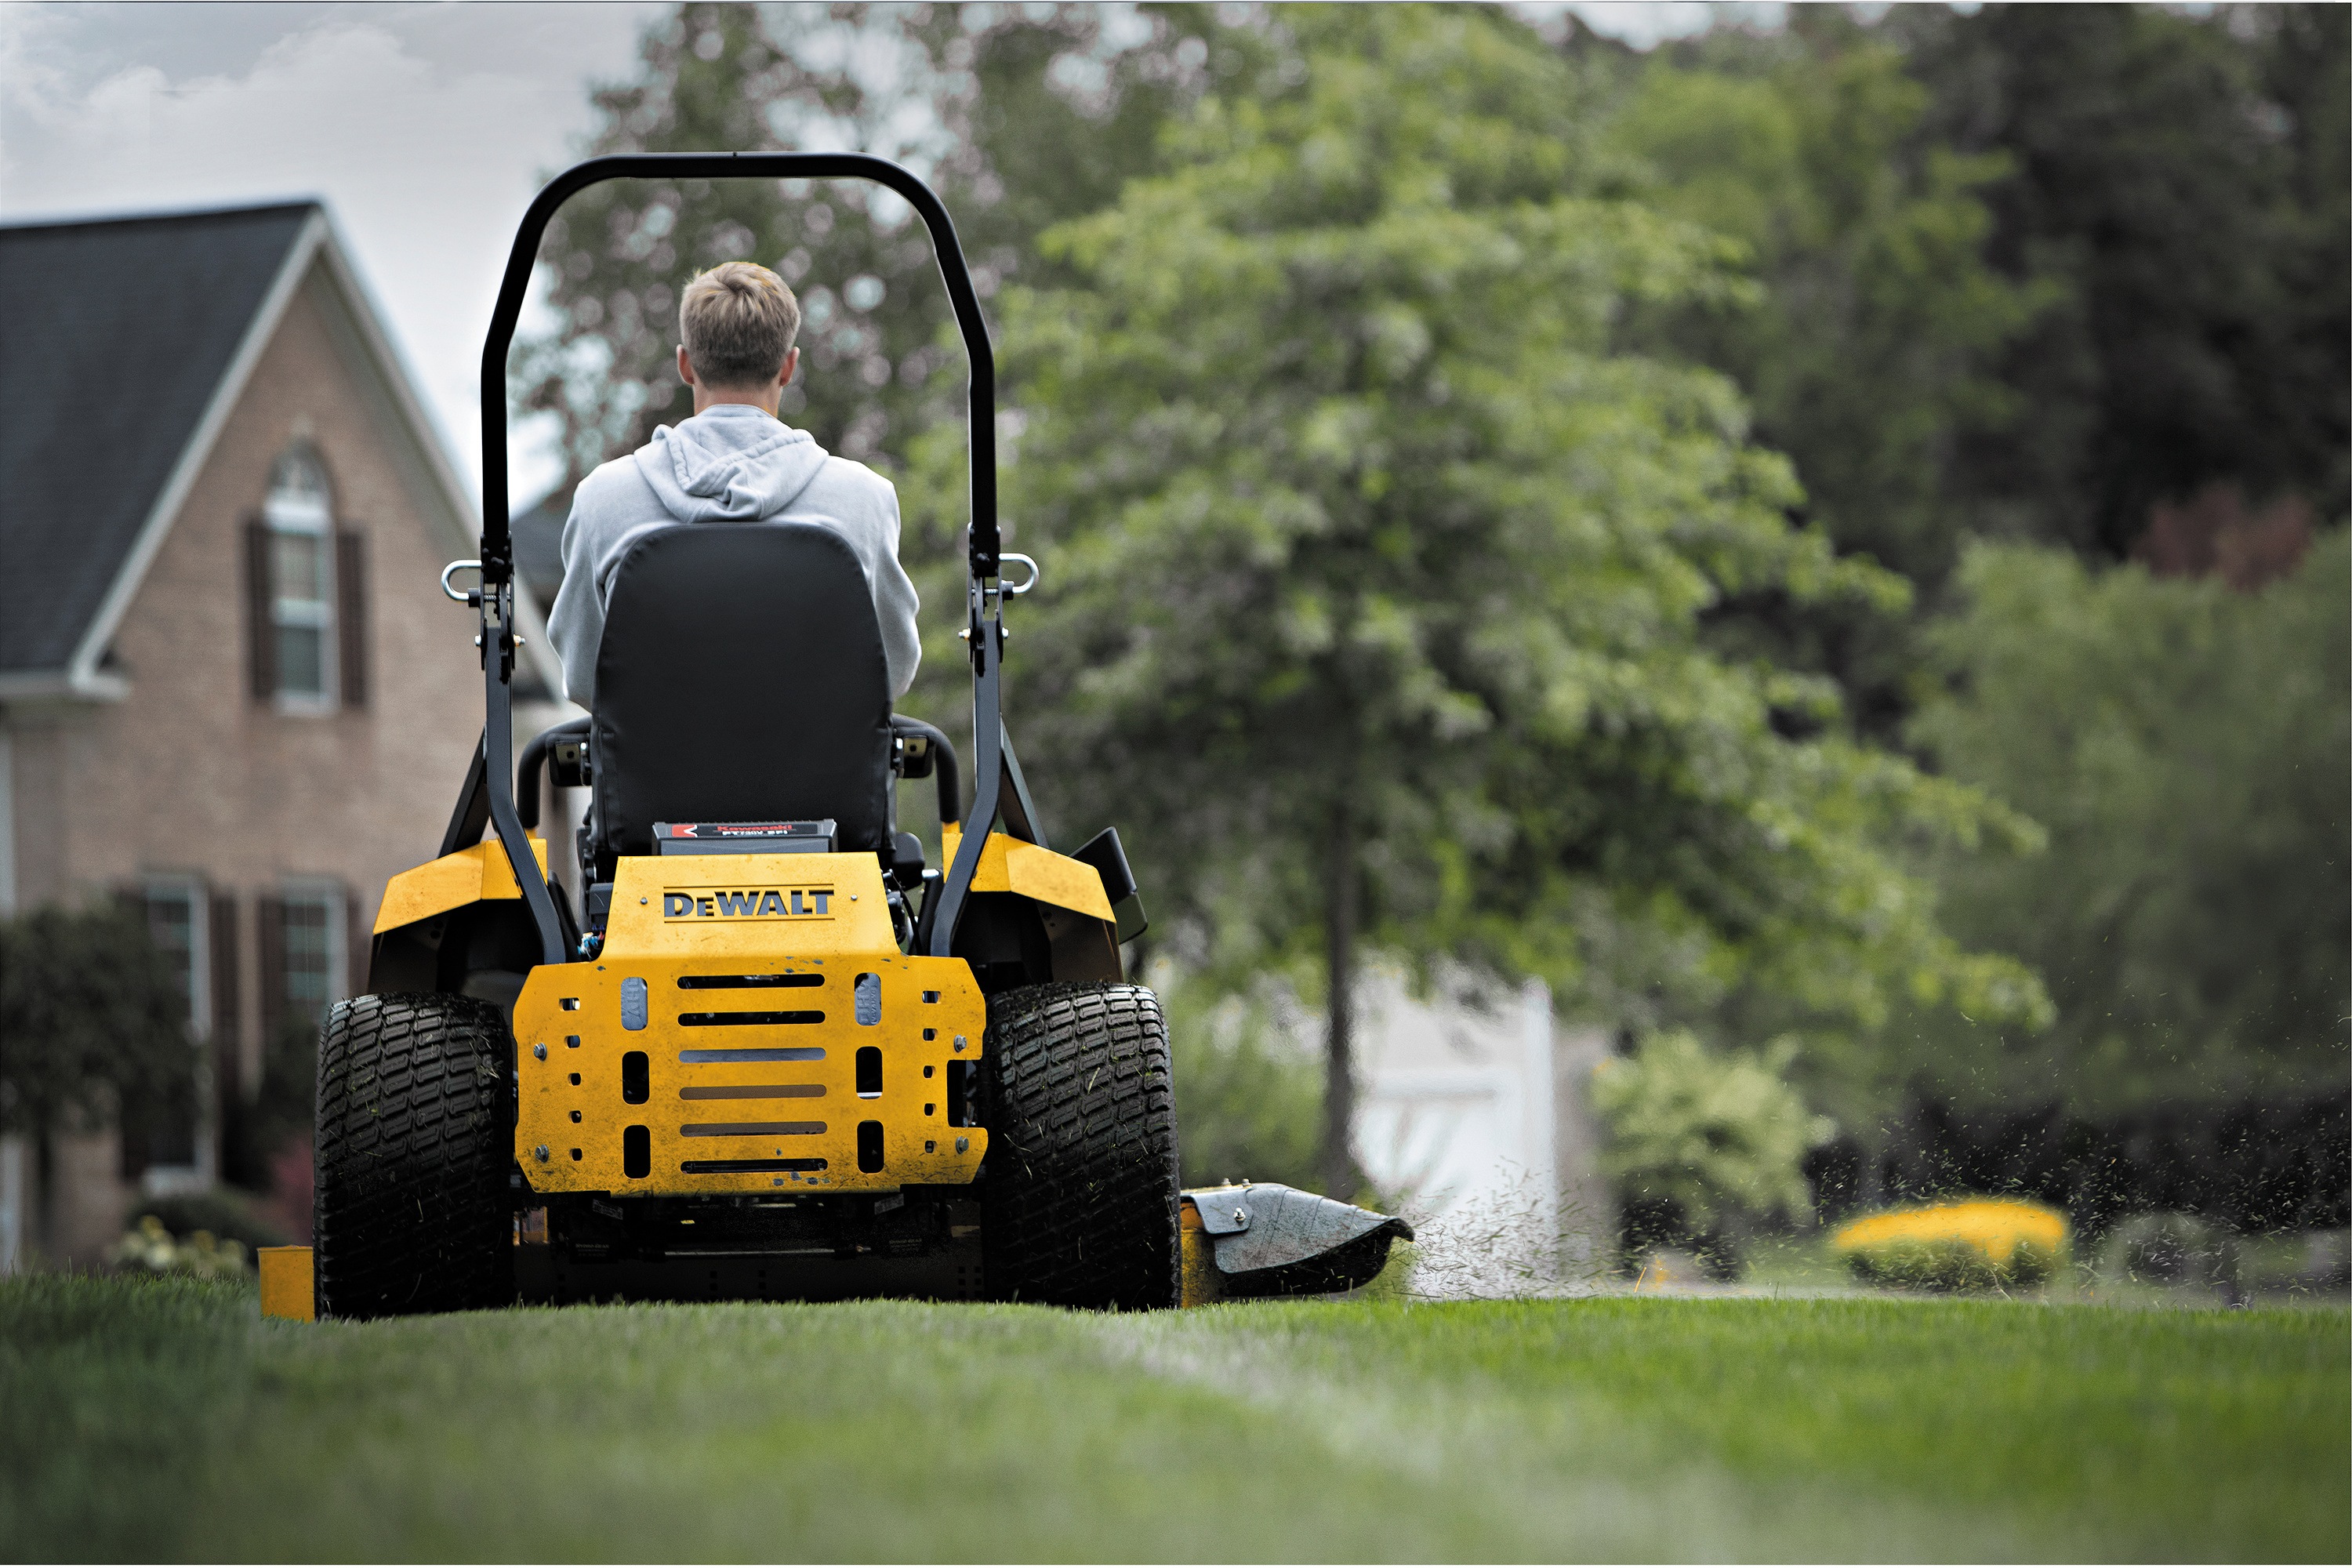 Backside view of 54 inch Kawasaki Gas Hydrostatic Commercial Zero Turn Mower being used by person to mow lawn. 